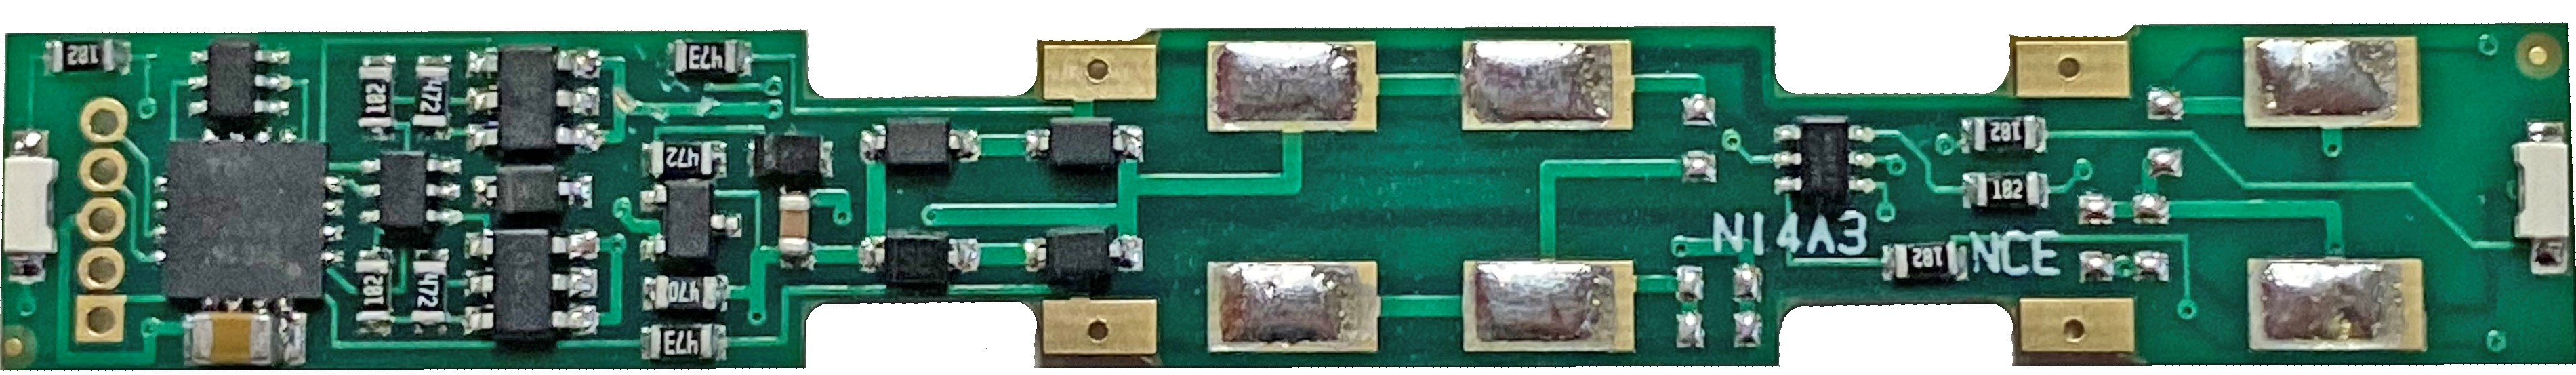 NCE 181 N Scale N14A3 Decoder - Board Replacement DCC Decoder - Fits Atlas GP39-2, Intermounatin SD40-2 and Similar